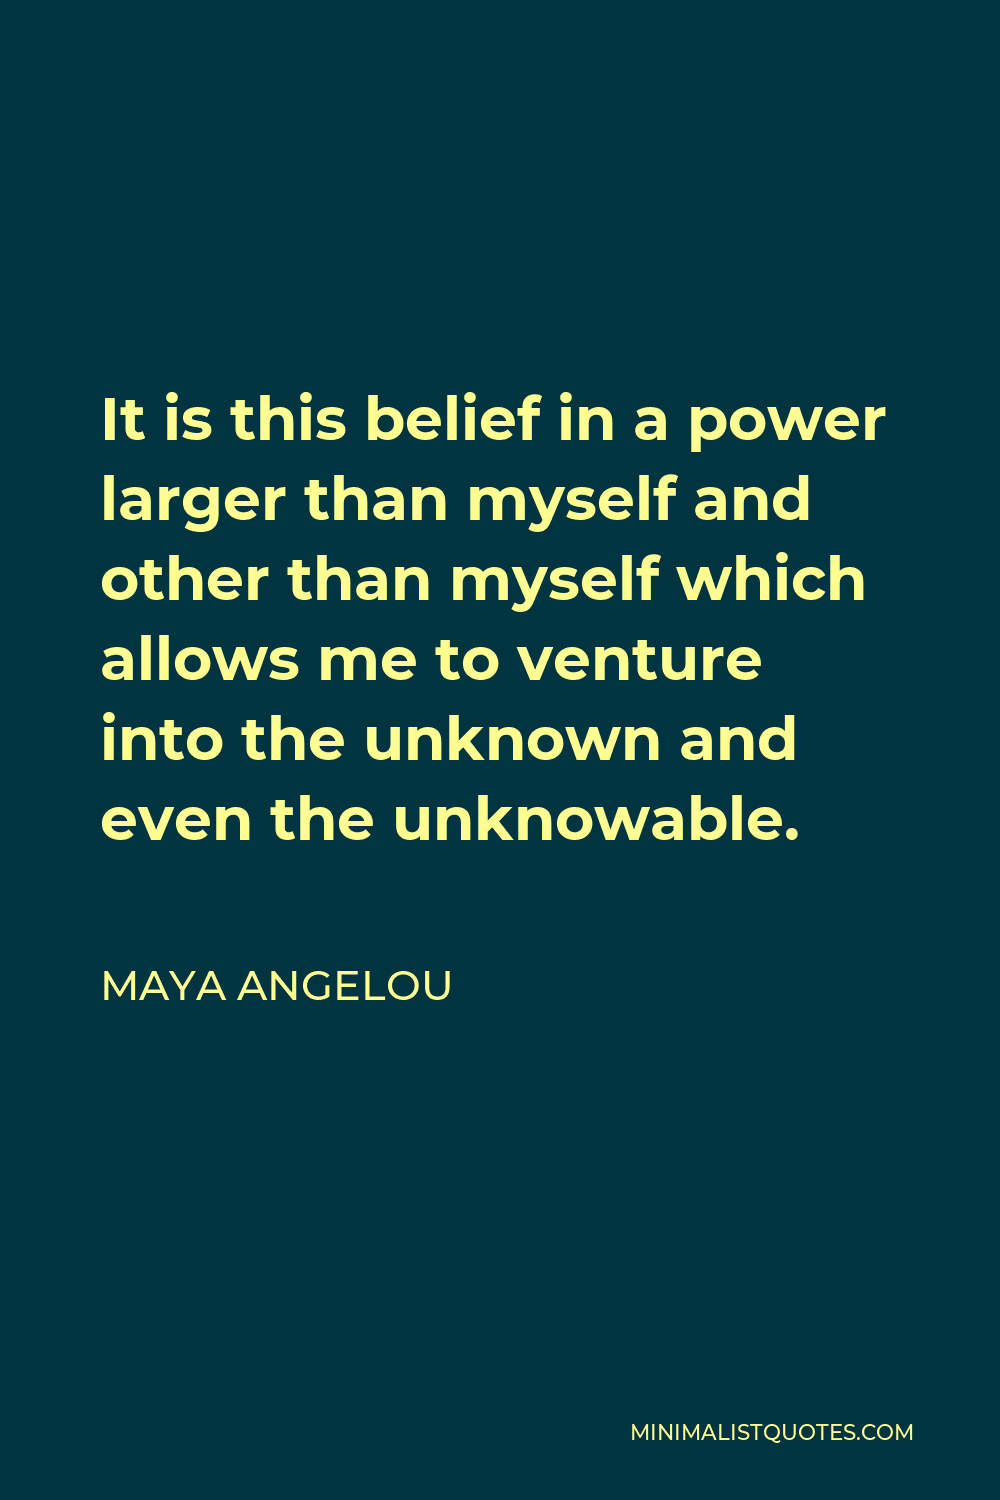 Maya Angelou Quote - It is this belief in a power larger than myself and other than myself which allows me to venture into the unknown and even the unknowable.